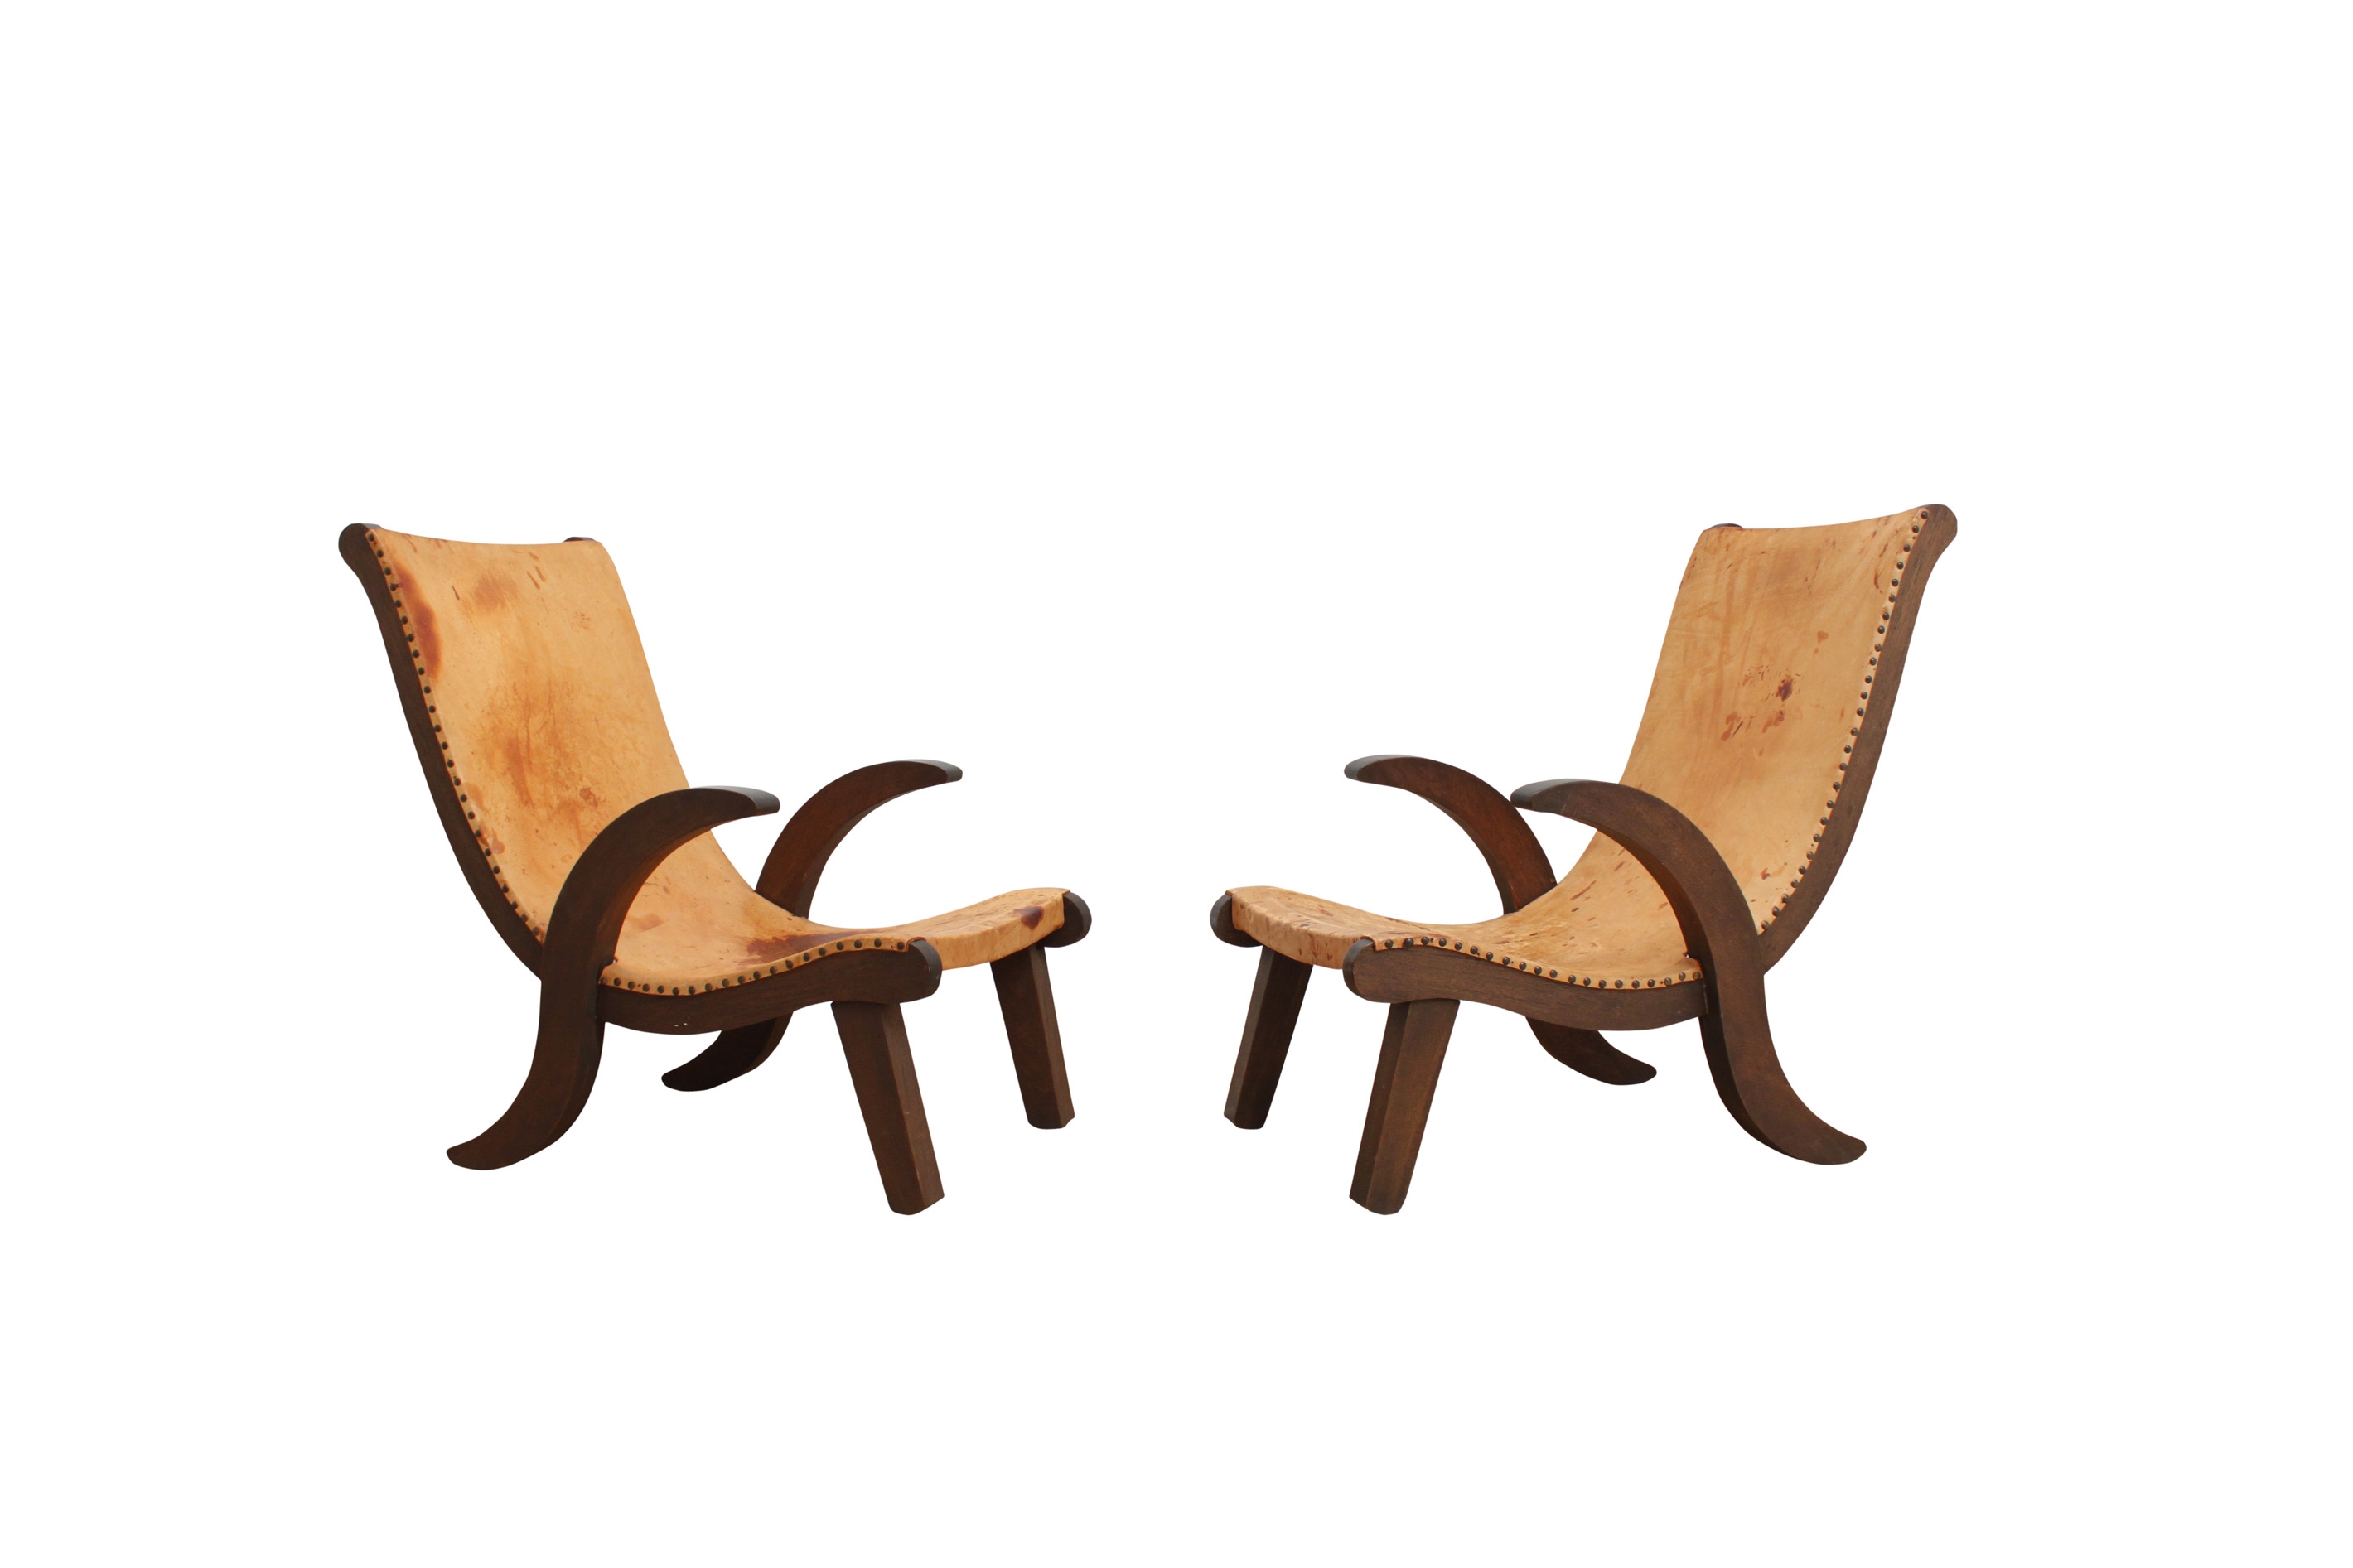 Butaque chairs